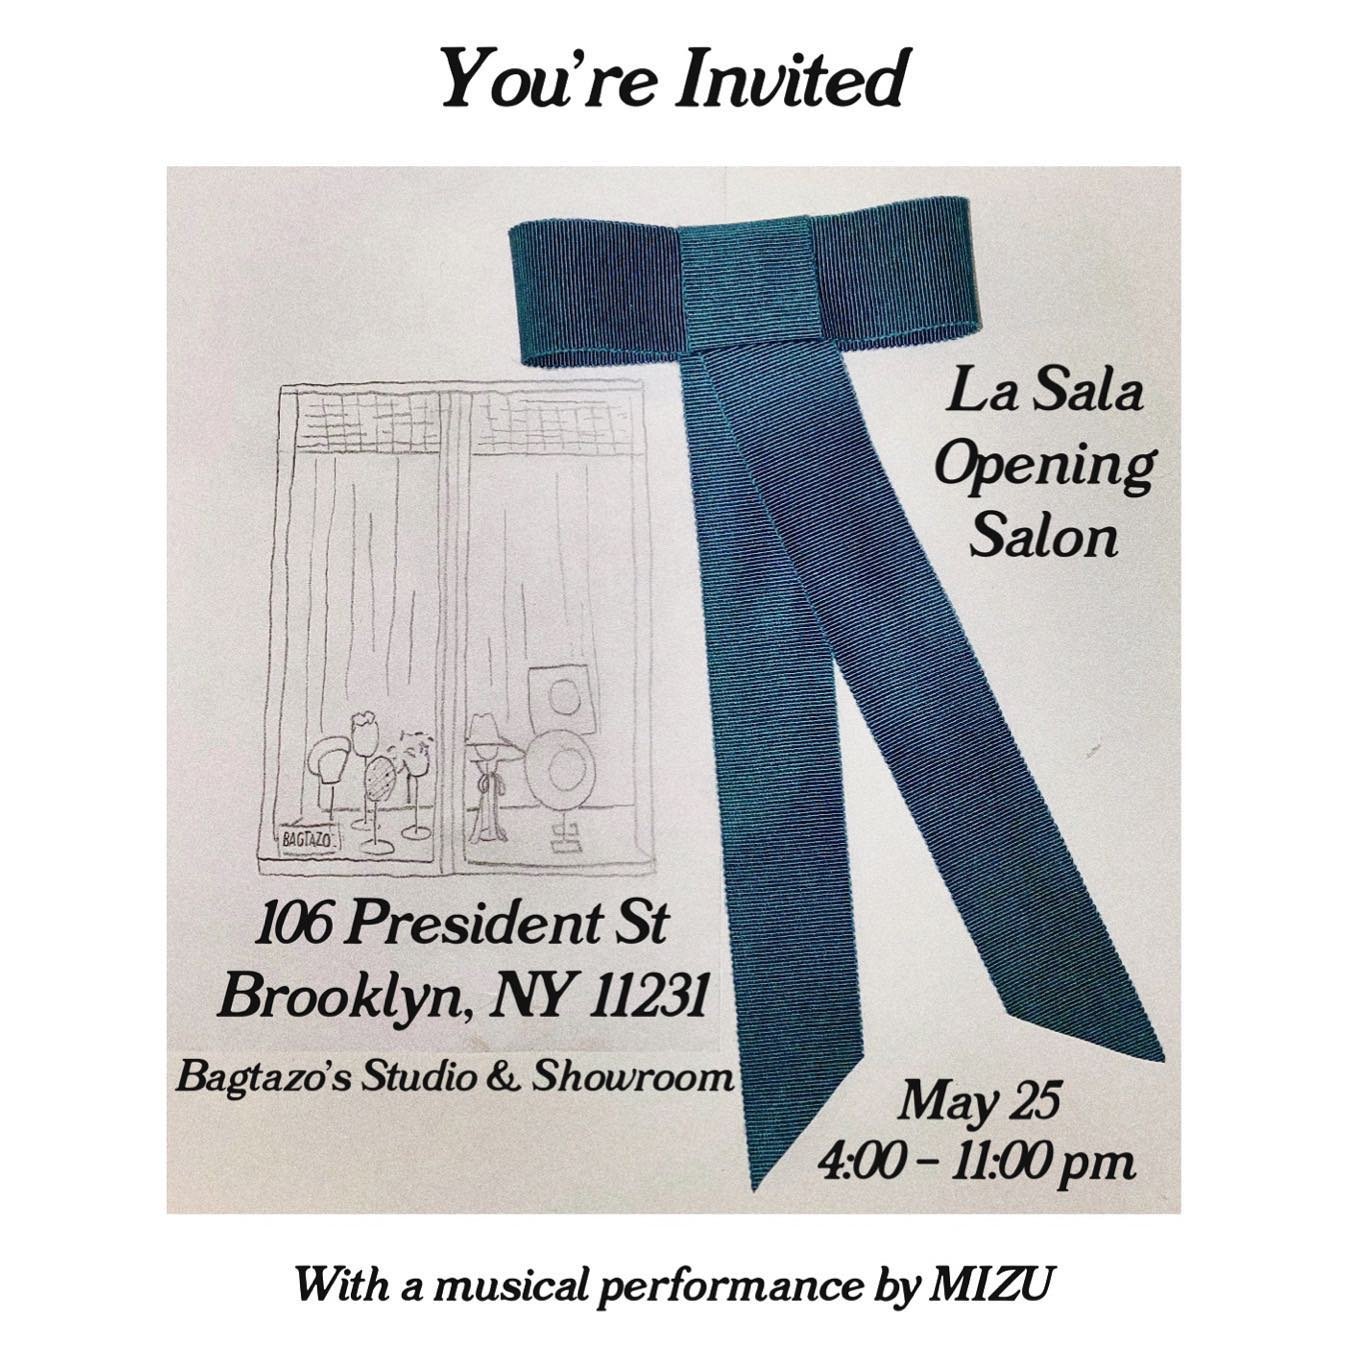 Next weekend!! La Sala&rsquo;s Opening Salon. Dress up, drinks &amp; hors d'oeuvres.

Sat May 25, 4:00&ndash;11:00 pm
With a musical performance by @iammizu__ 

La Sala
Bagtazo&rsquo;s Studio &amp; Showroom
106 President St, Brooklyn NY, 11231

10 mi